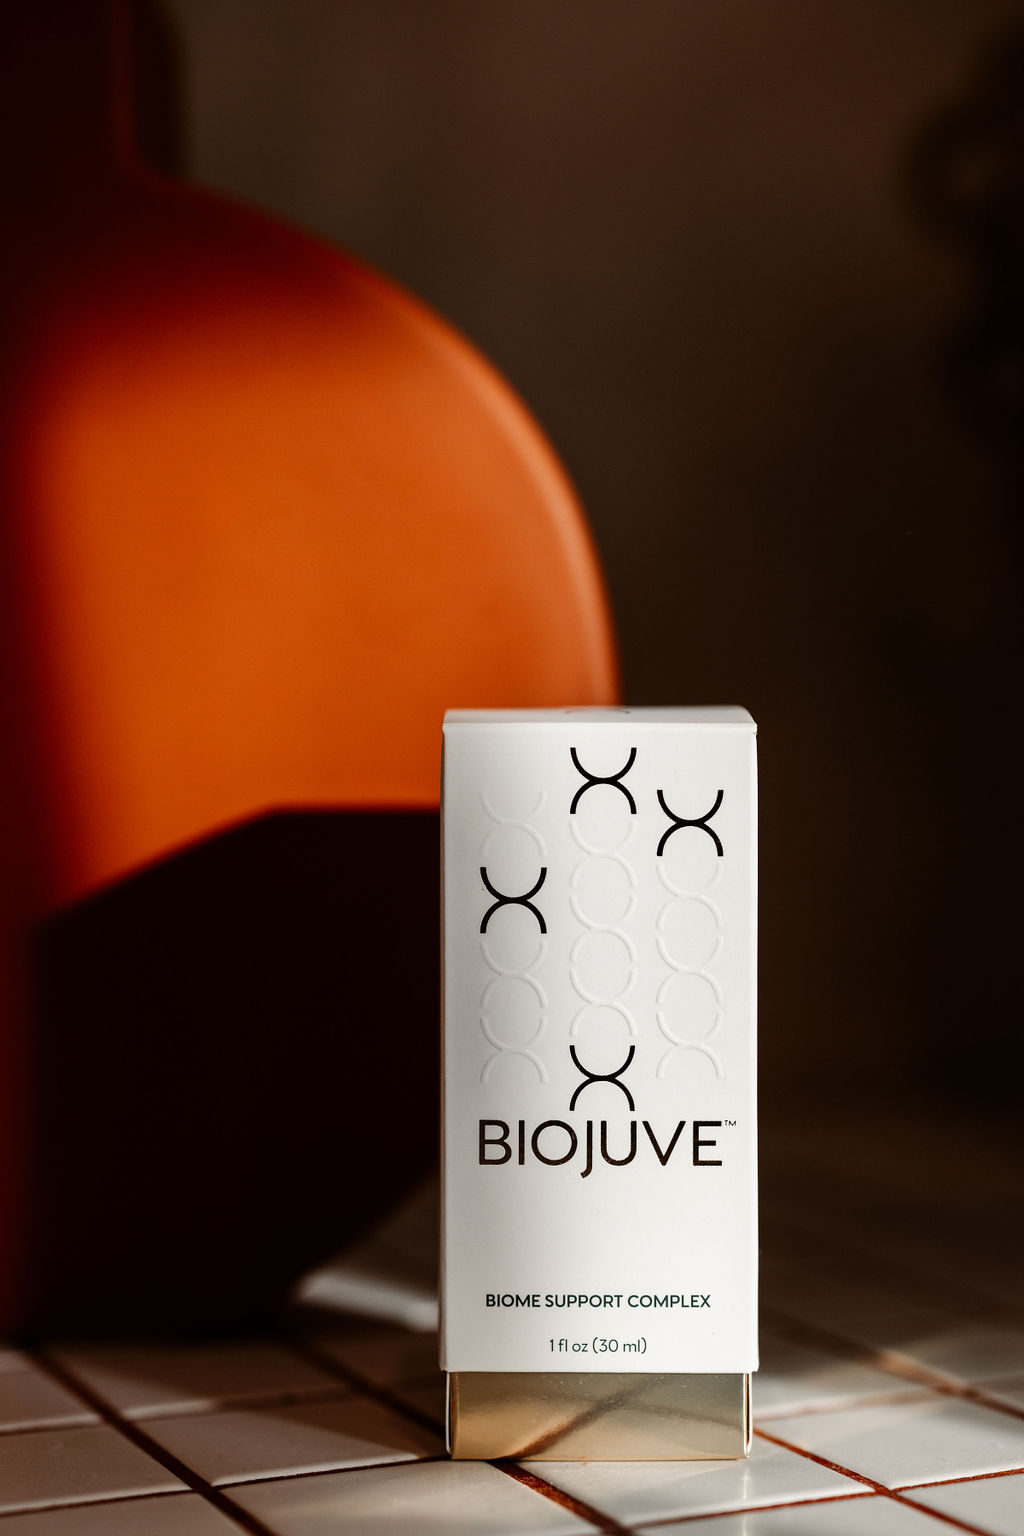 biojuve skincare products for sale at sisa skincare in freshwater sydney northern beaches